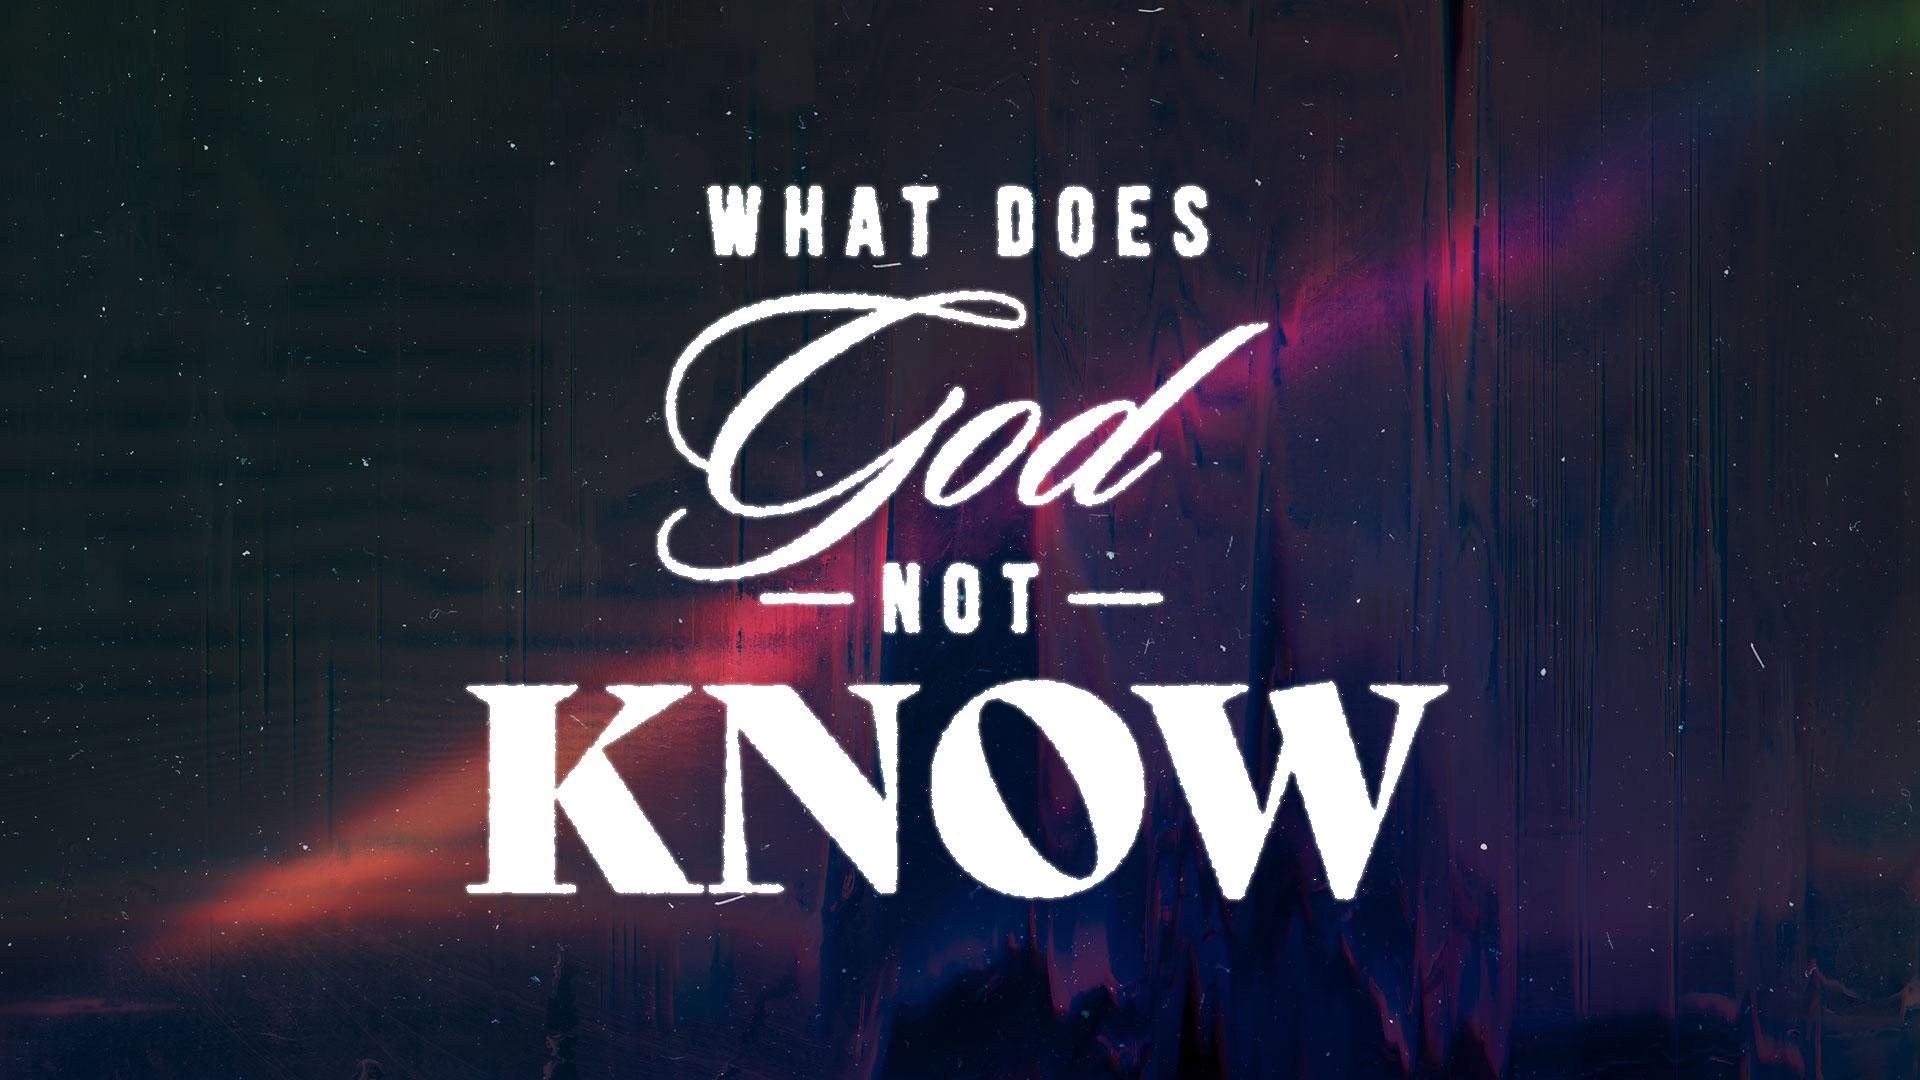 What Does God Not Know?